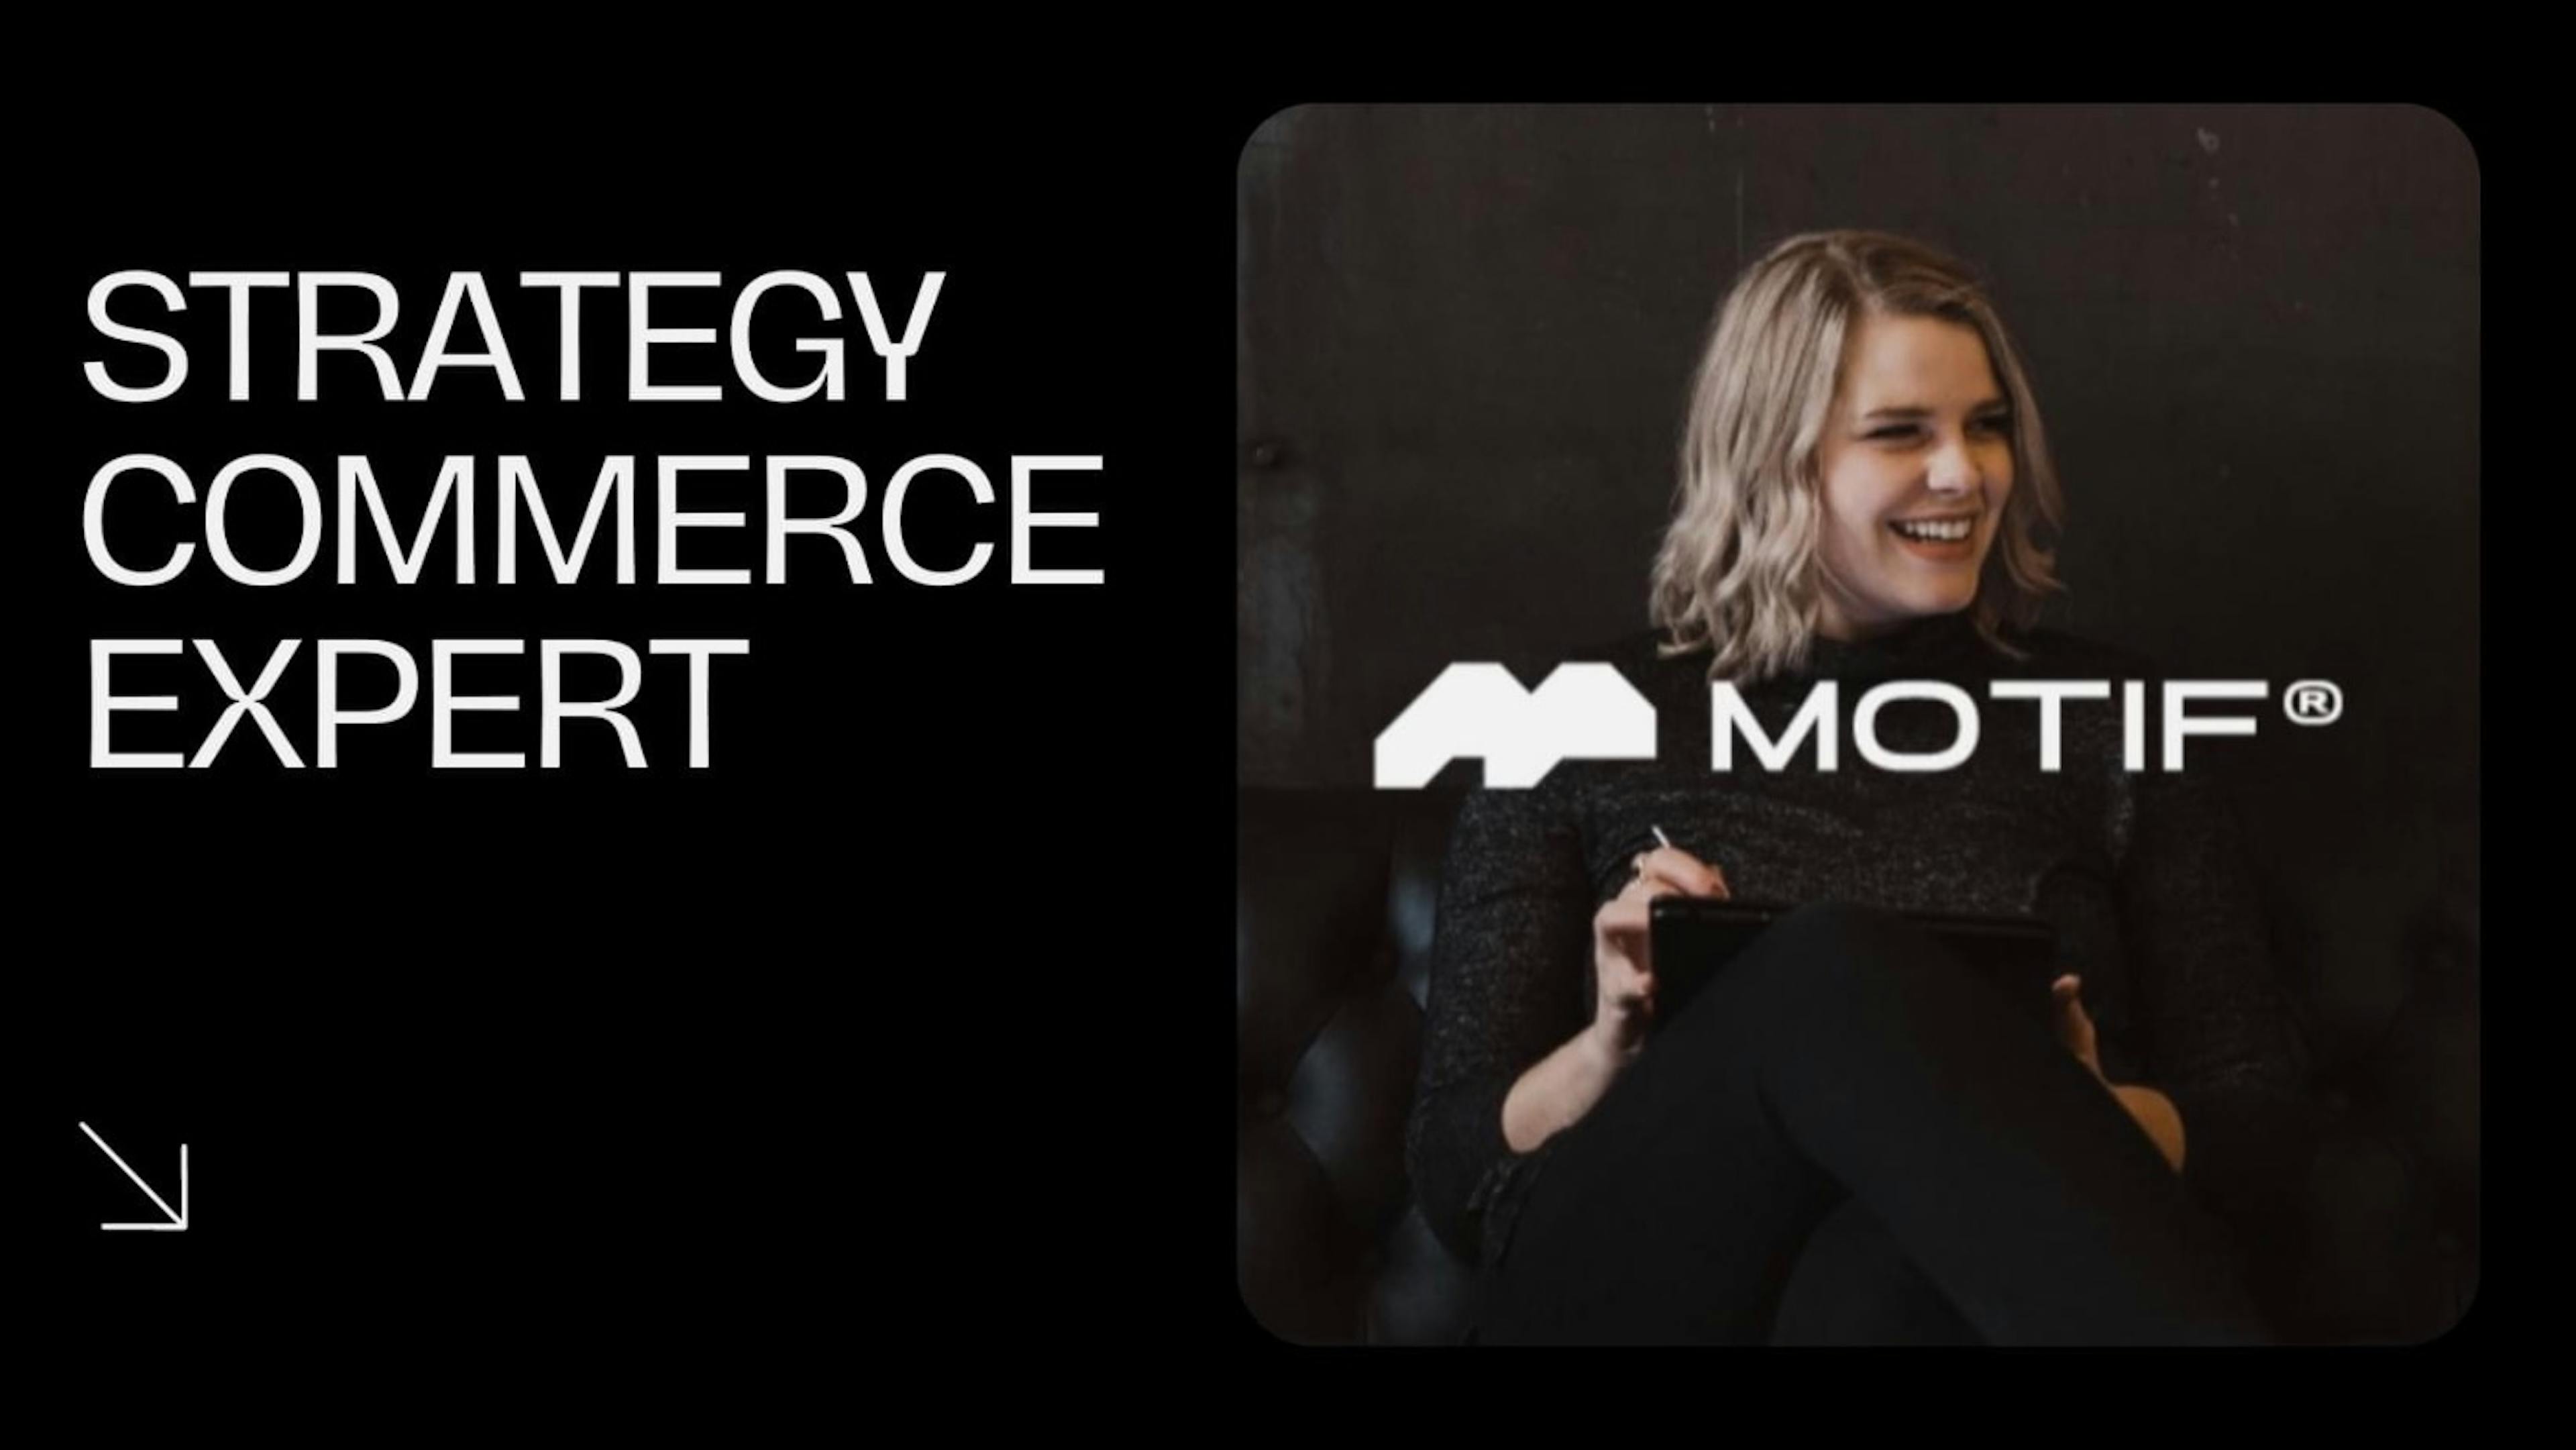 Strategy, Commerce, Expert is our Motto at MOTIF 